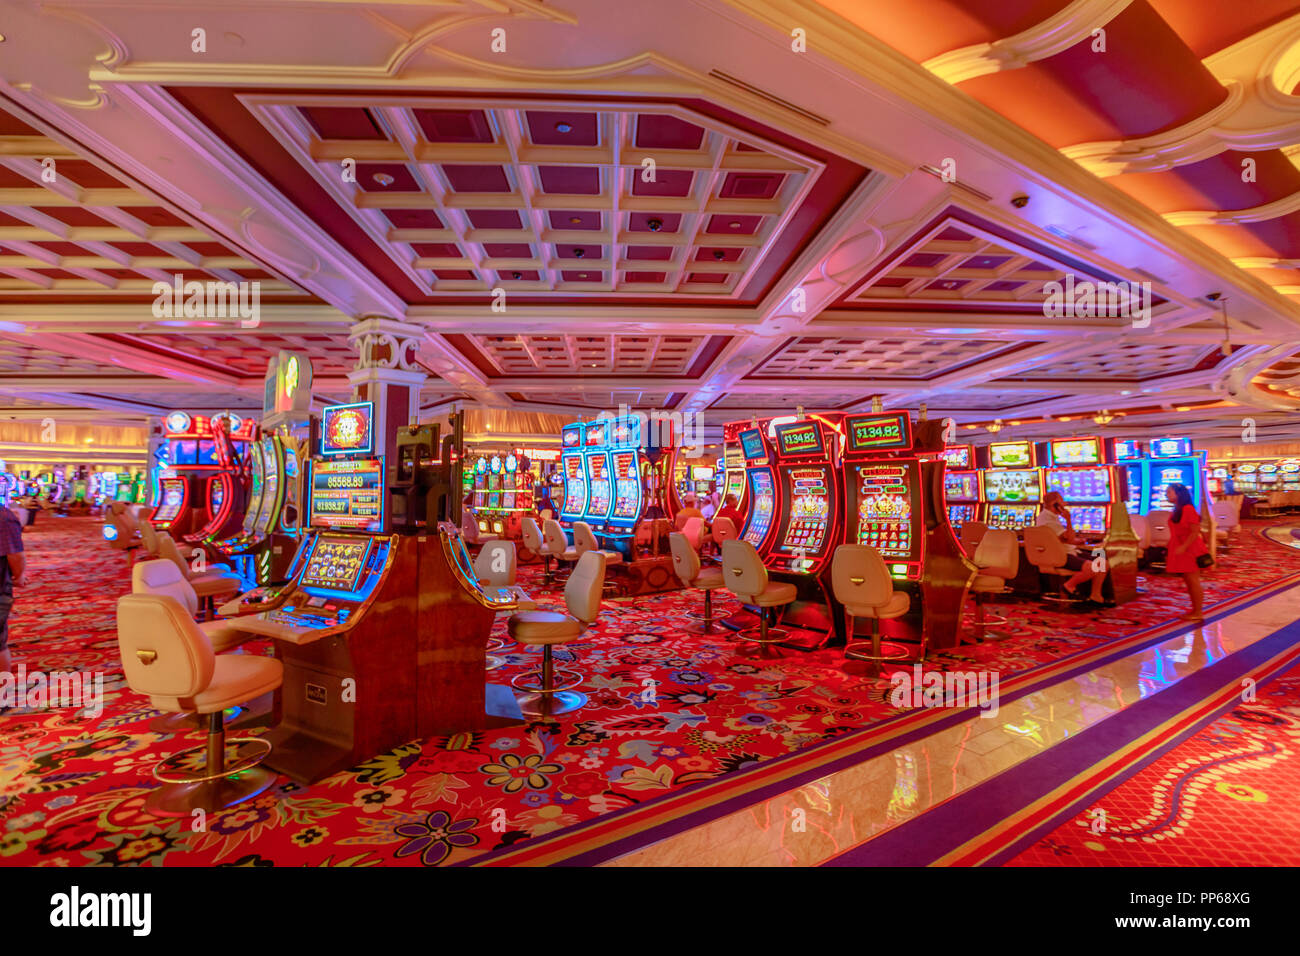 Las Vegas, Nevada, United States - August 18, 2018: slot machine inside the luxurious Wynn Resort Hotel, a 5-star, themed Paradise, Las Vegas Strip. The hotel stands in place of old Desert inn. Stock Photo